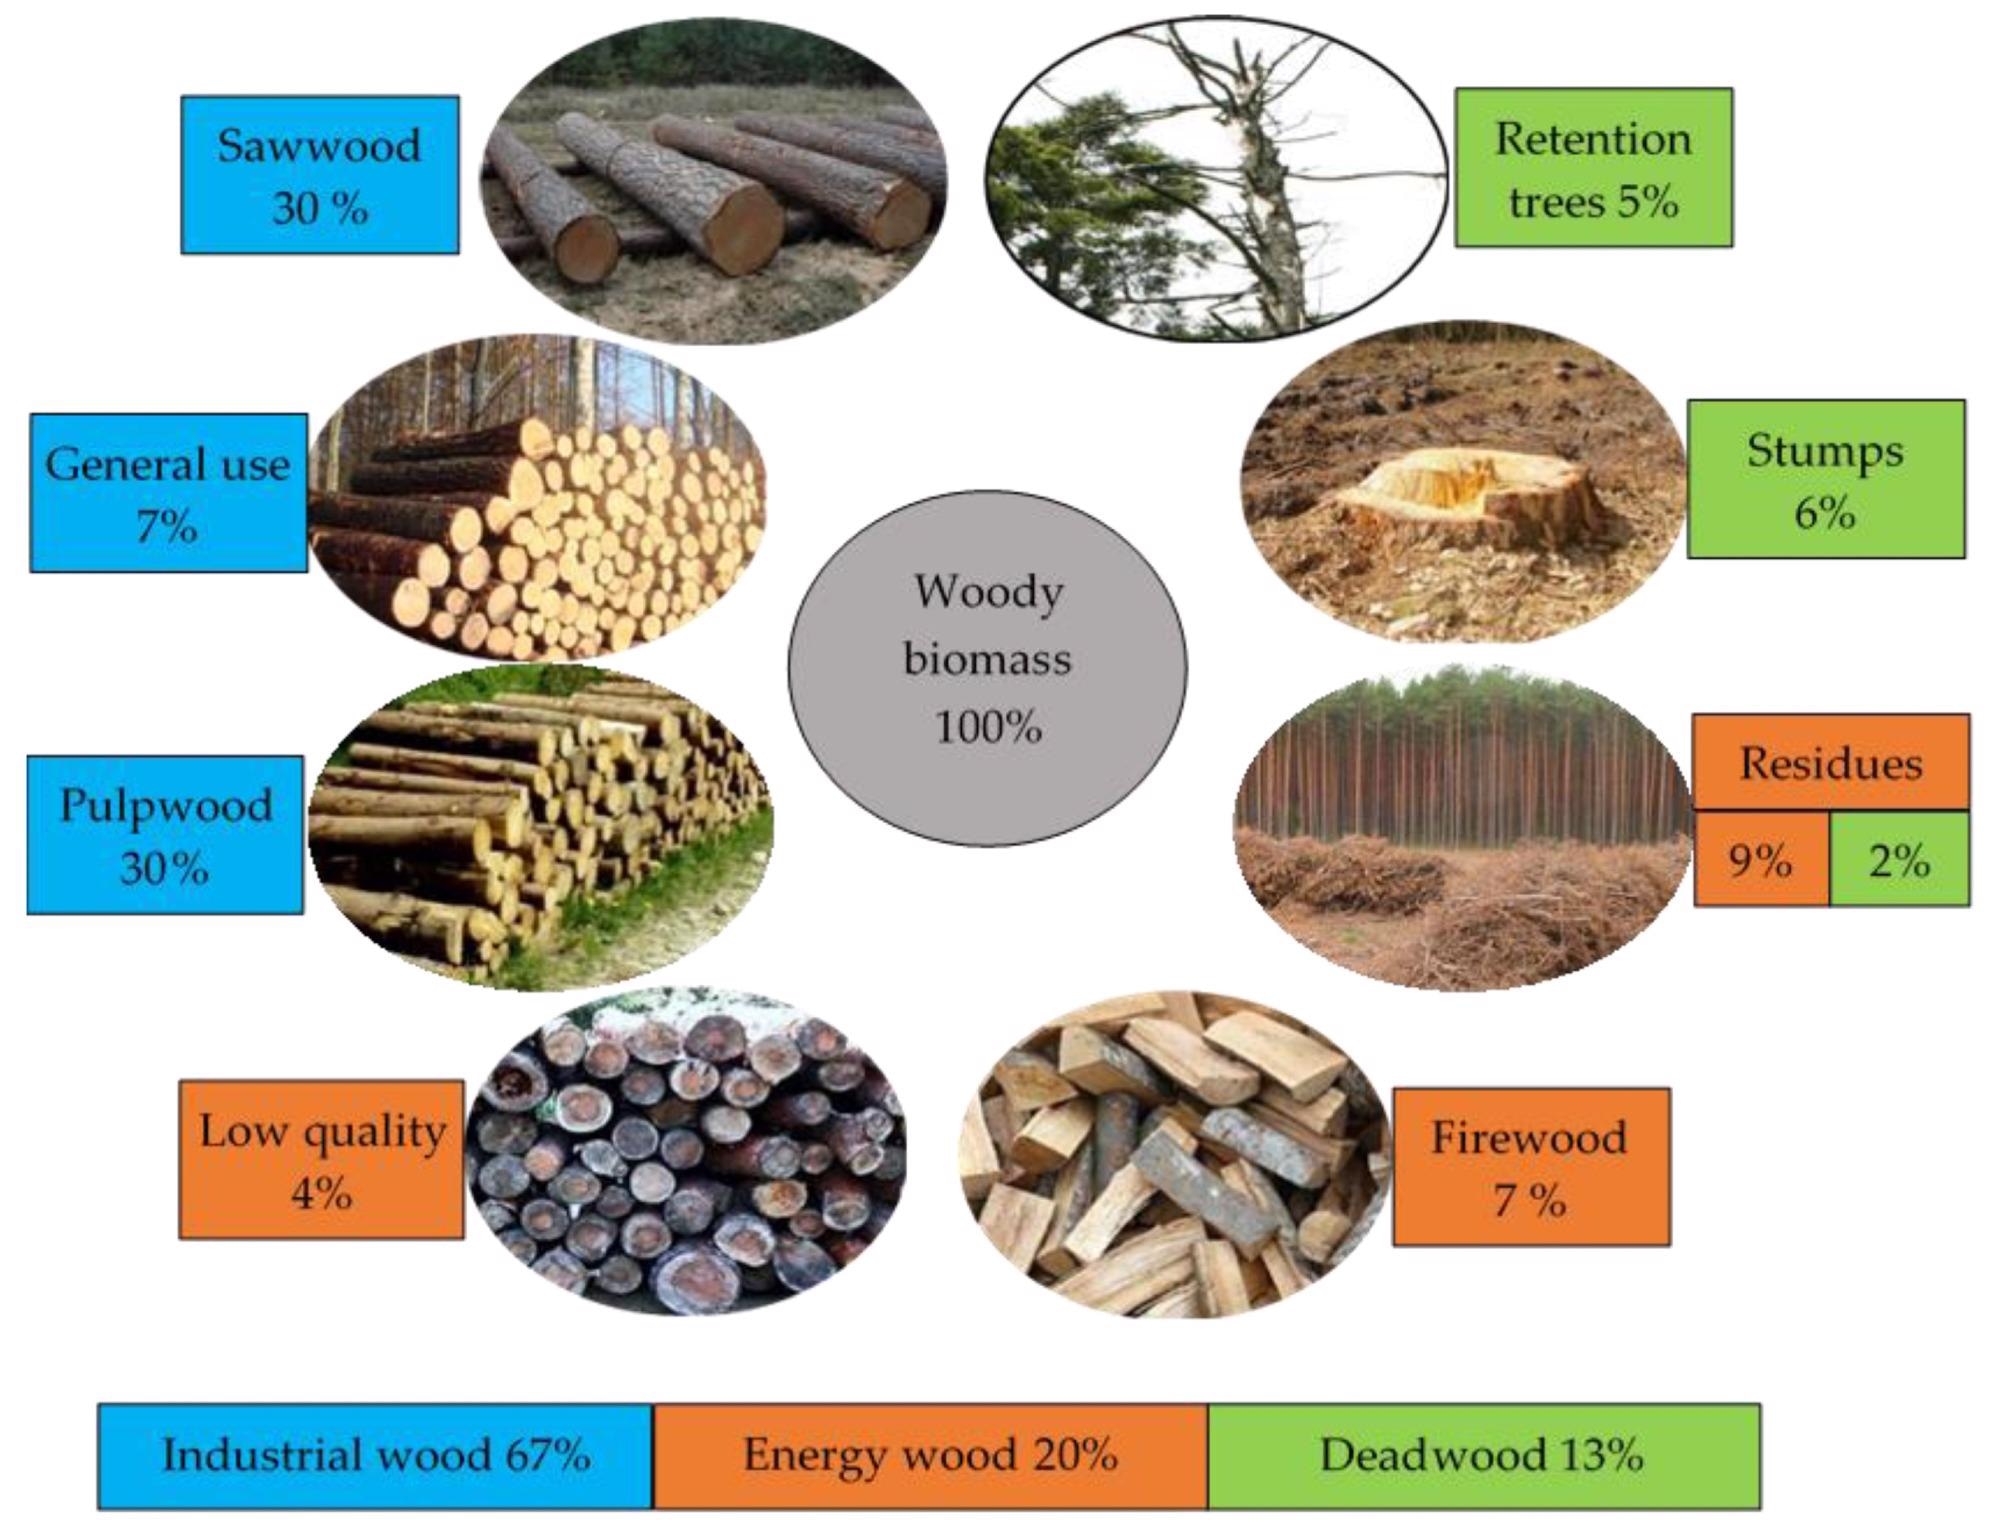 The balance and hierarchical use of the woody biomass according to economic and ecological principles.